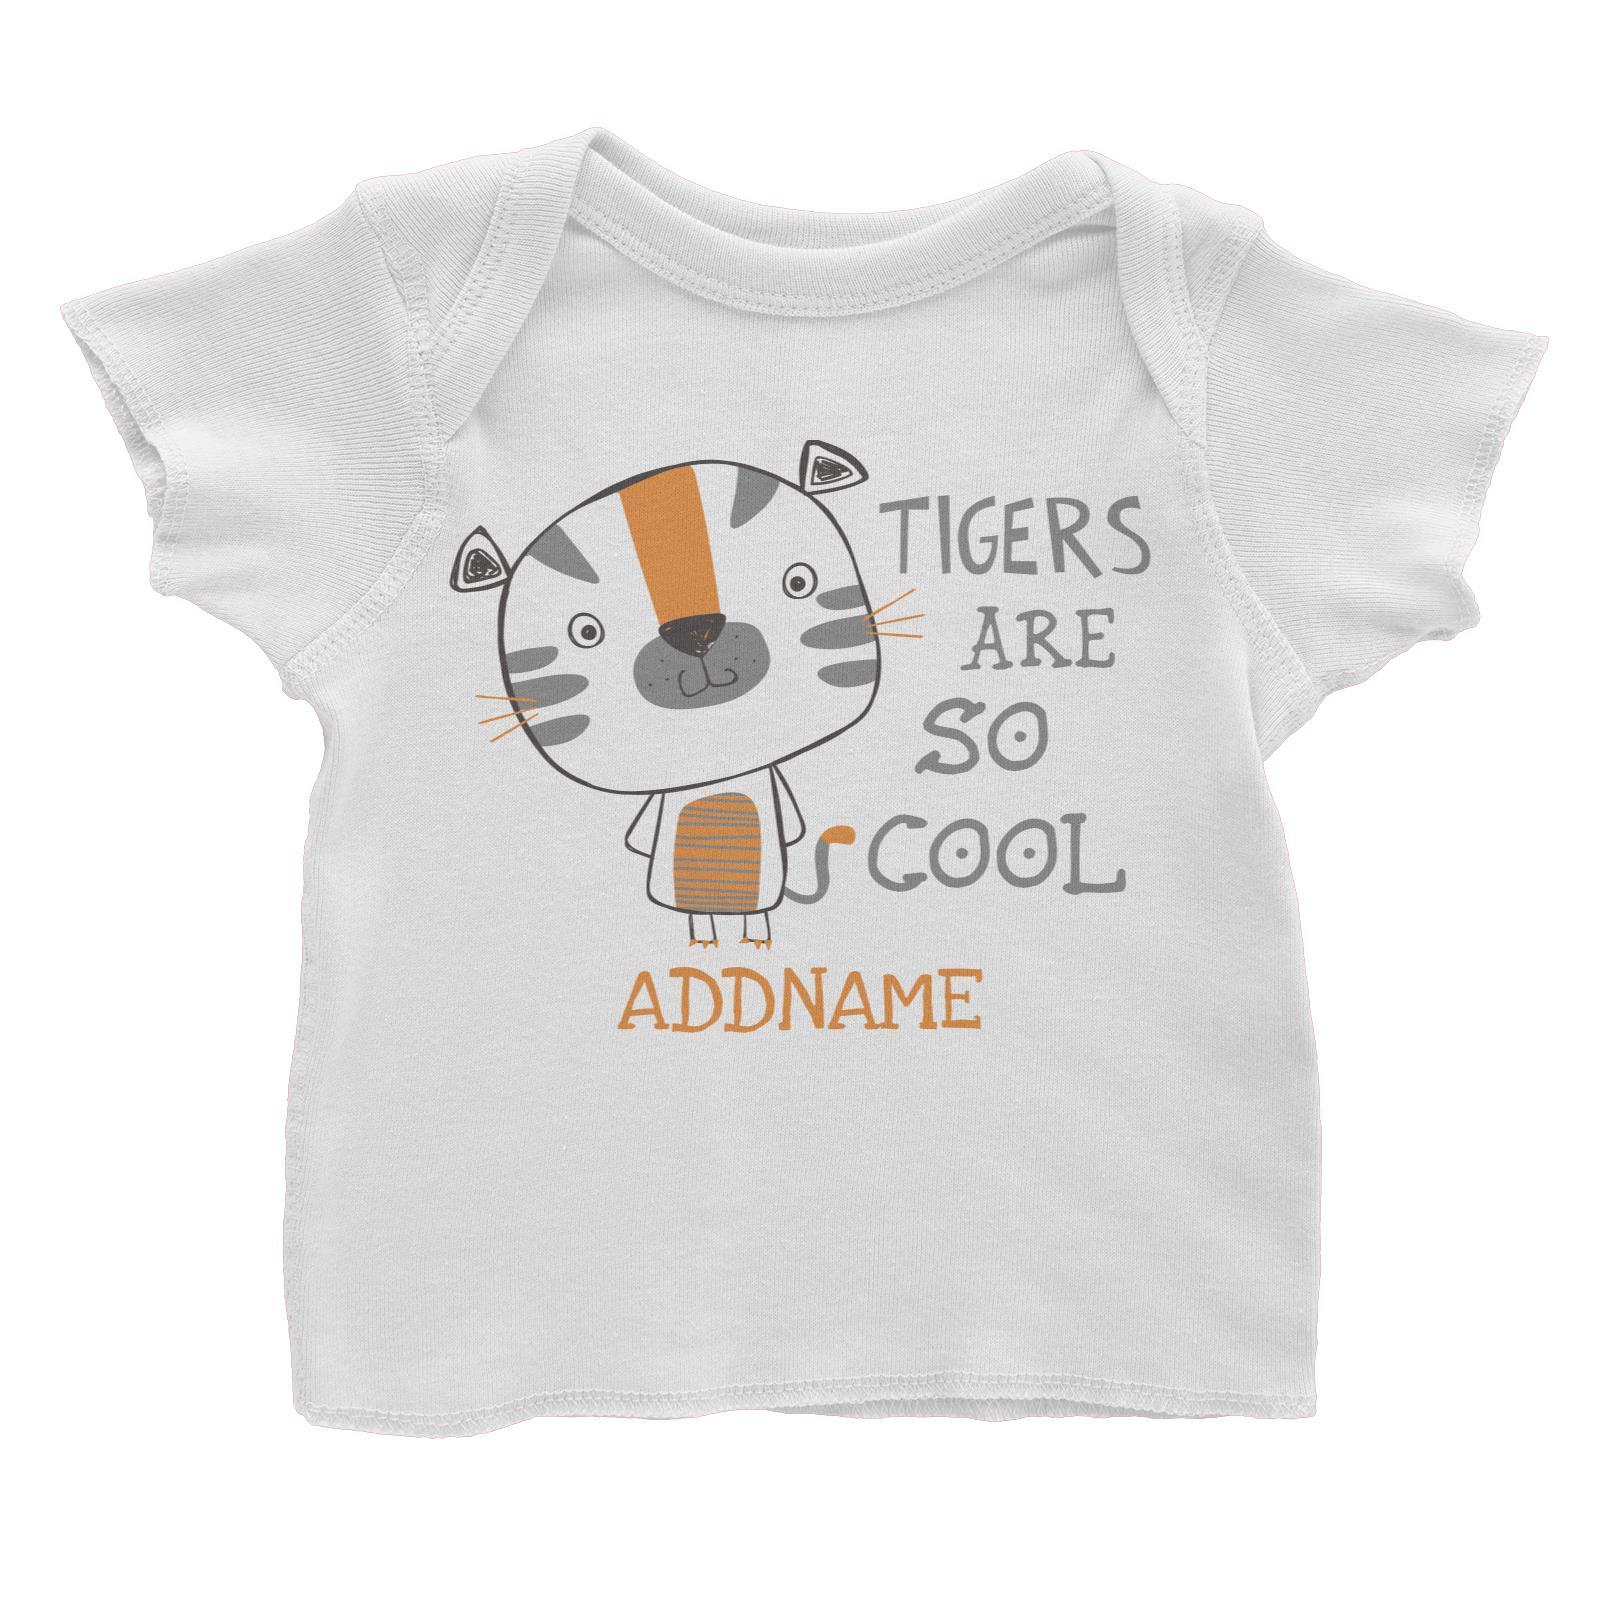 Tigers Are So Cool Addname Baby T-Shirt